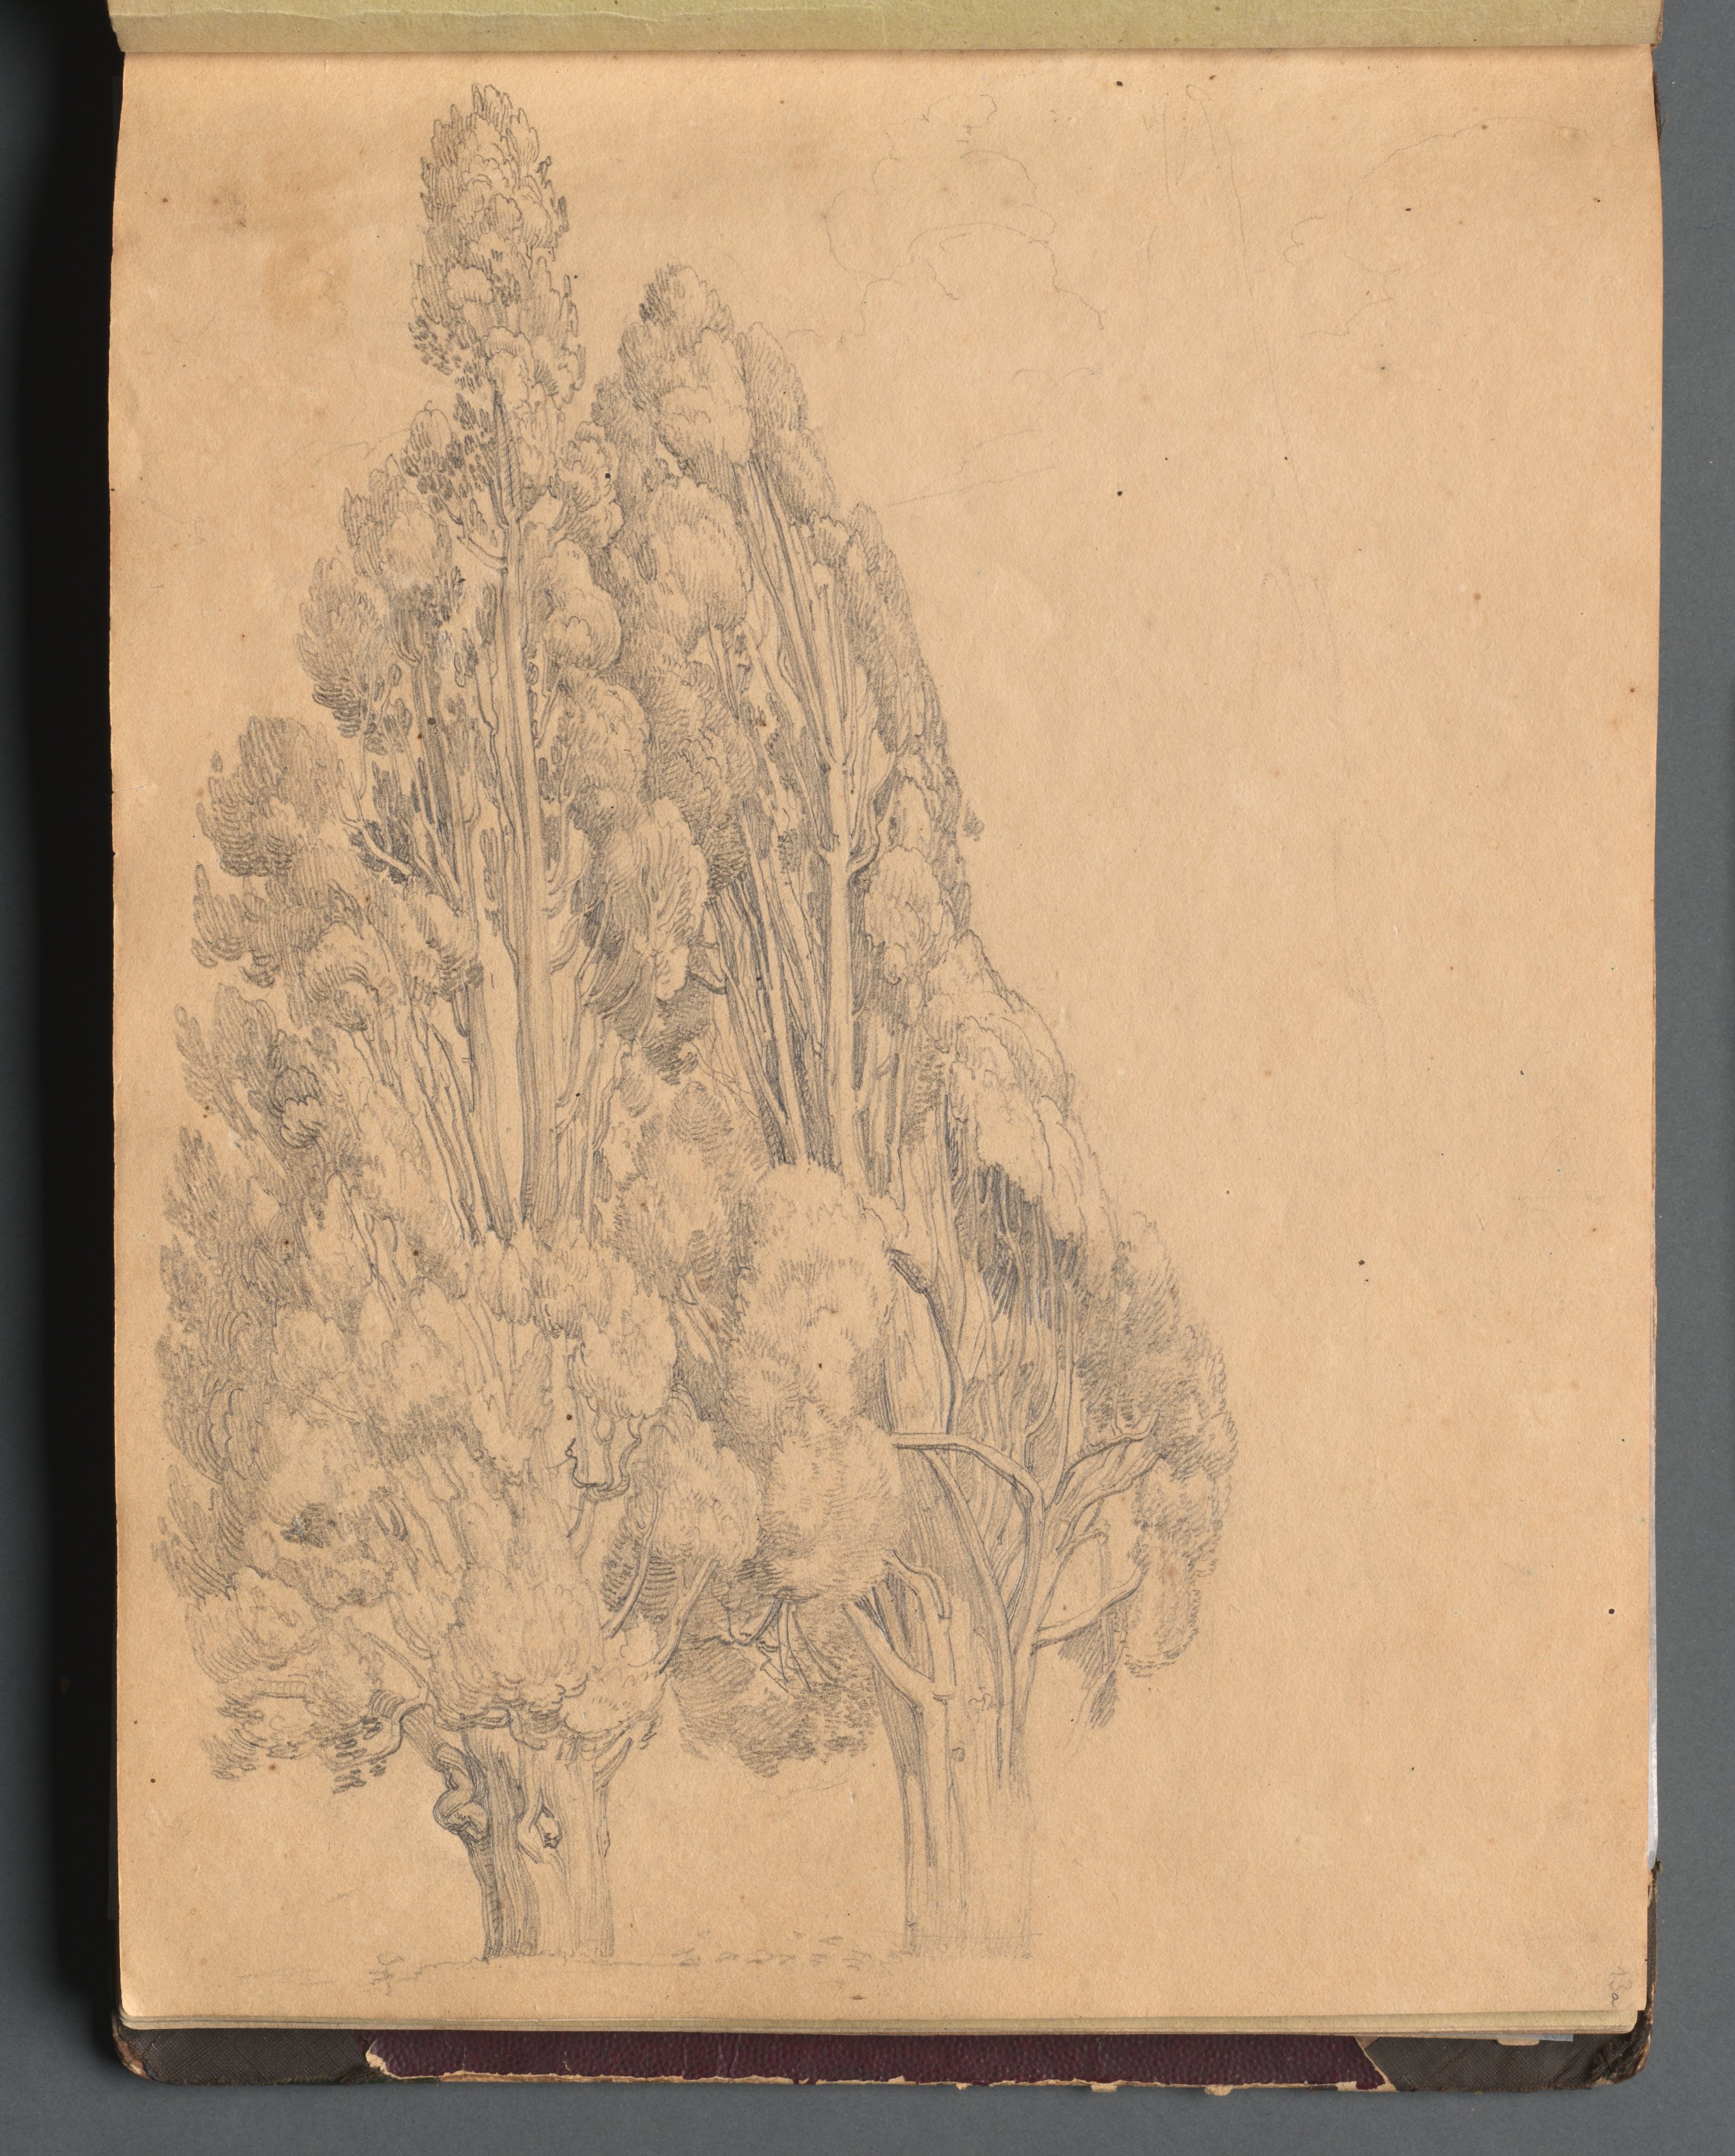 Album with Views of Rome and Surroundings, Landscape Studies, page 13a: Trees